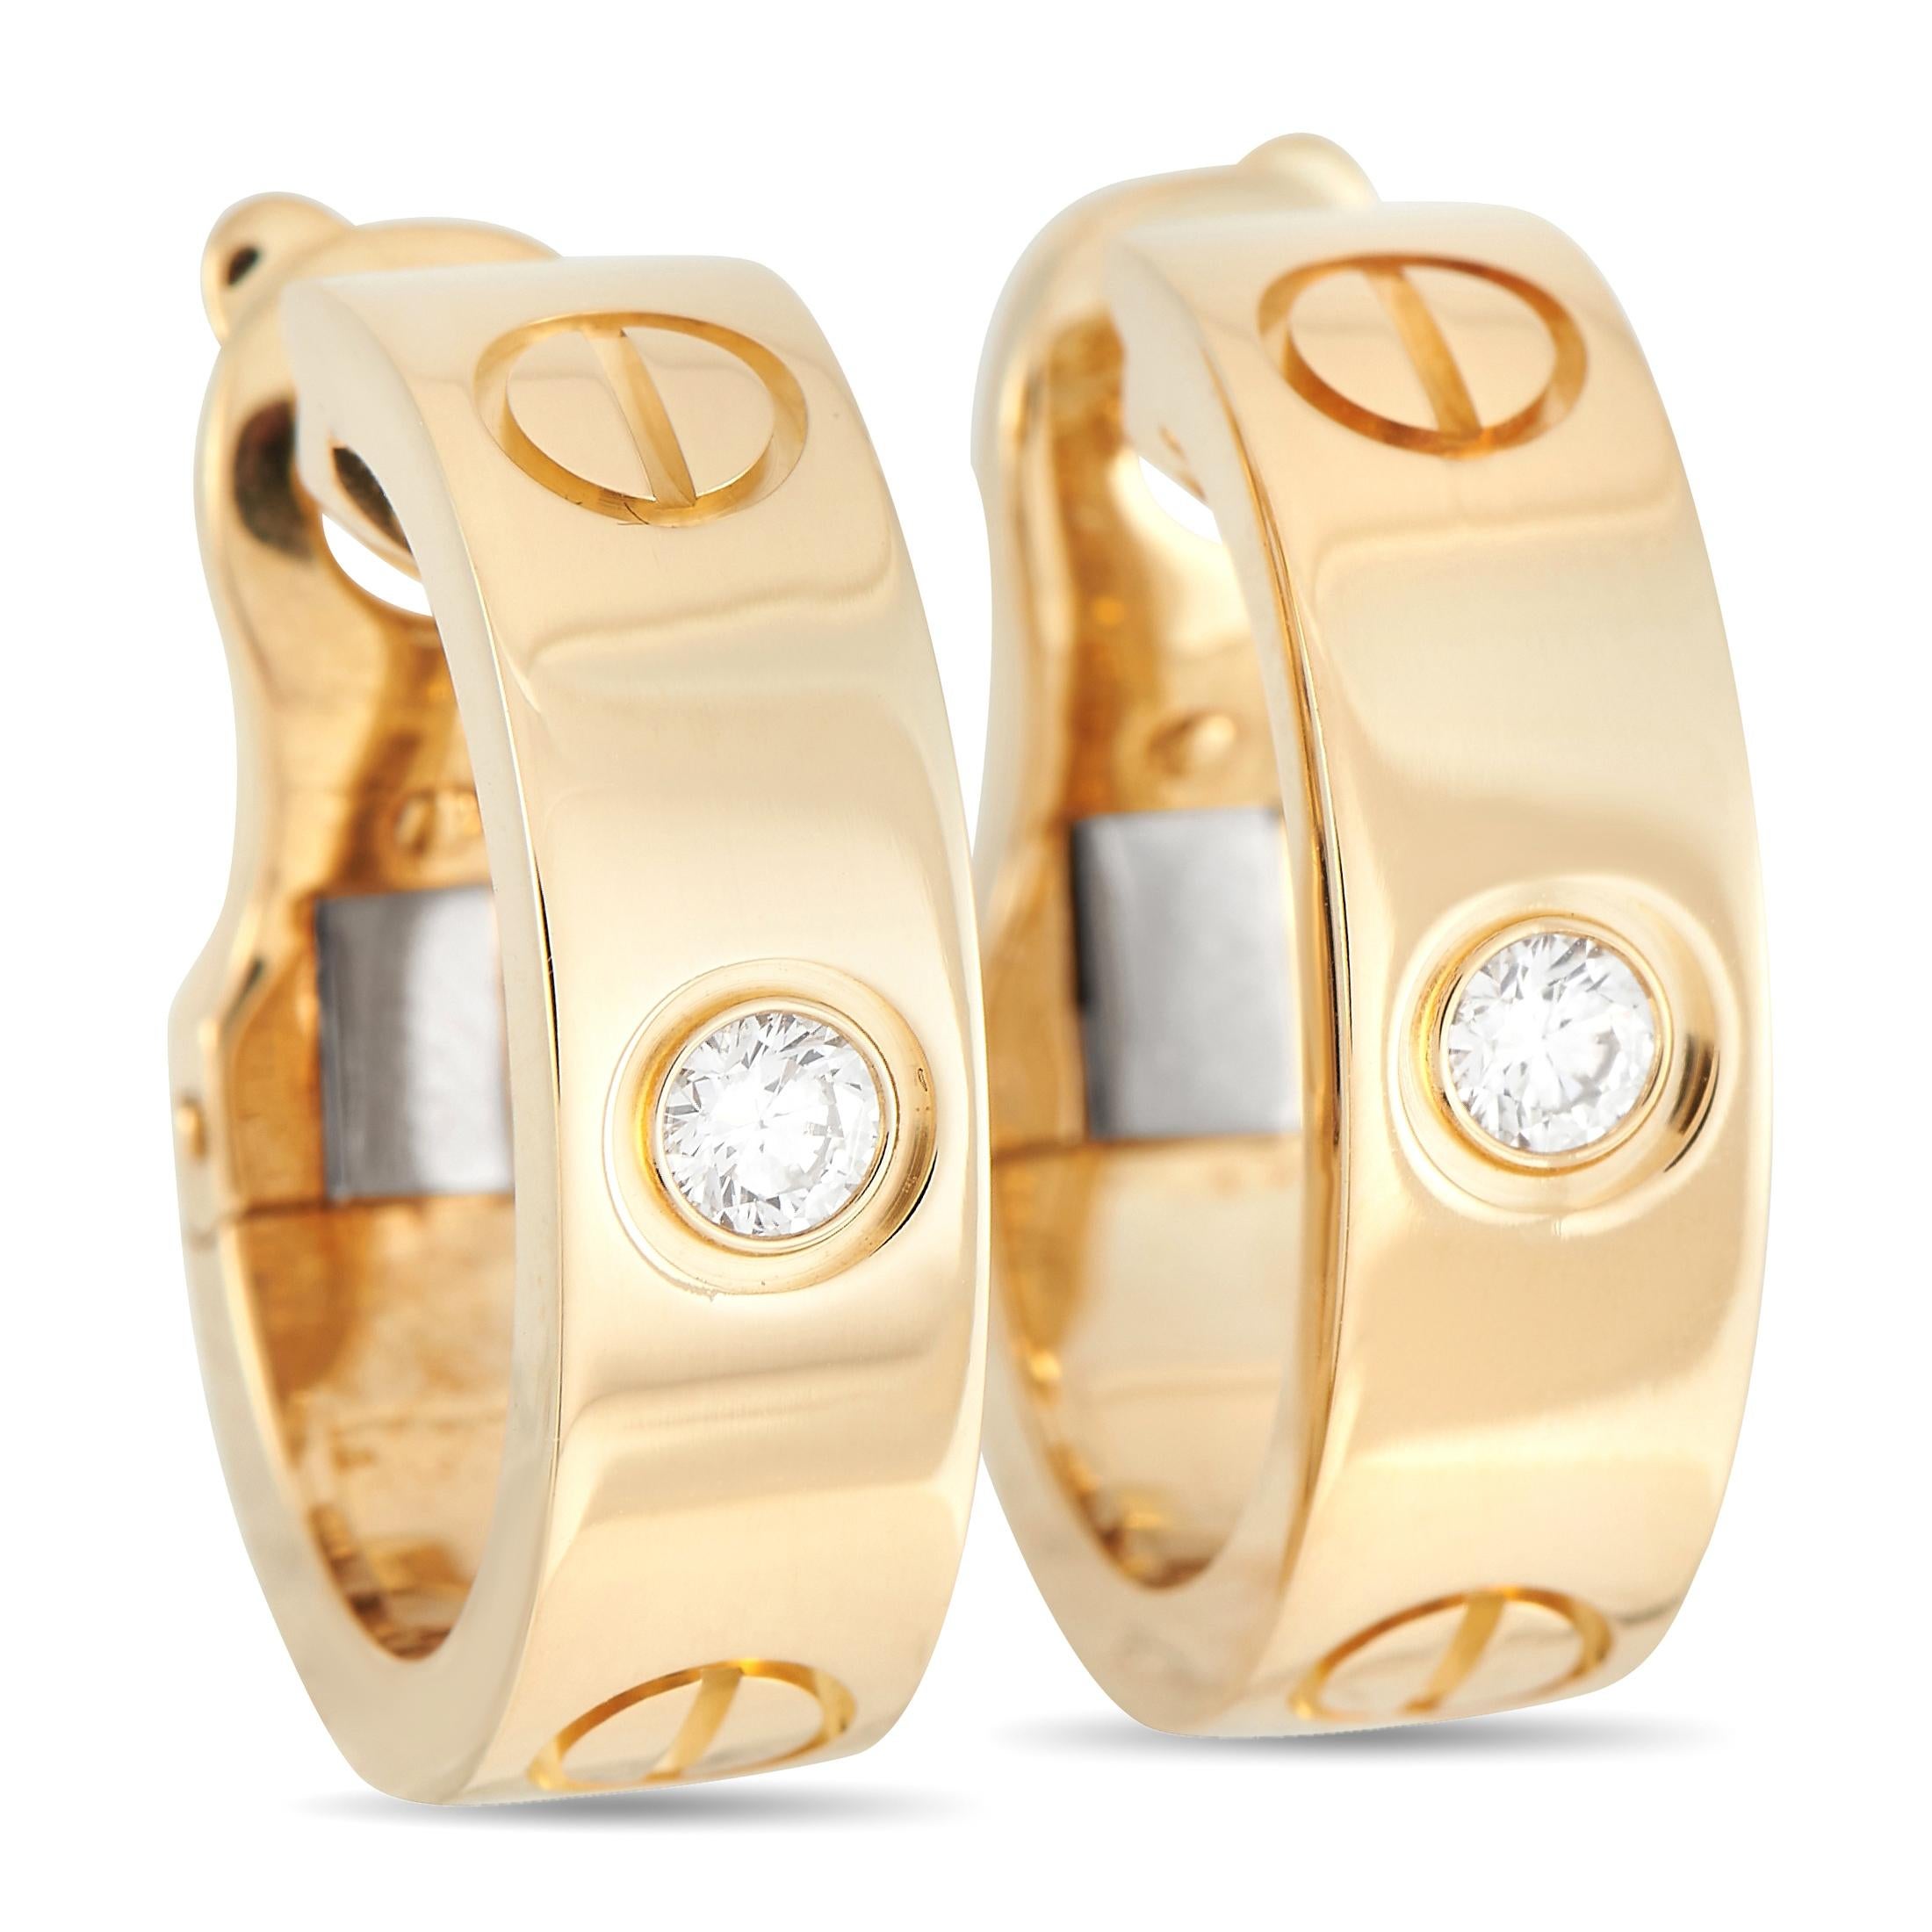 Elevate your jewelry collection with these iconic Cartier LOVE collection earrings. Each one is made from lustrous 18K Yellow Gold and includes a singular round-cut diamond at the center. They also boast a hoop-style design that measures 0.75” long